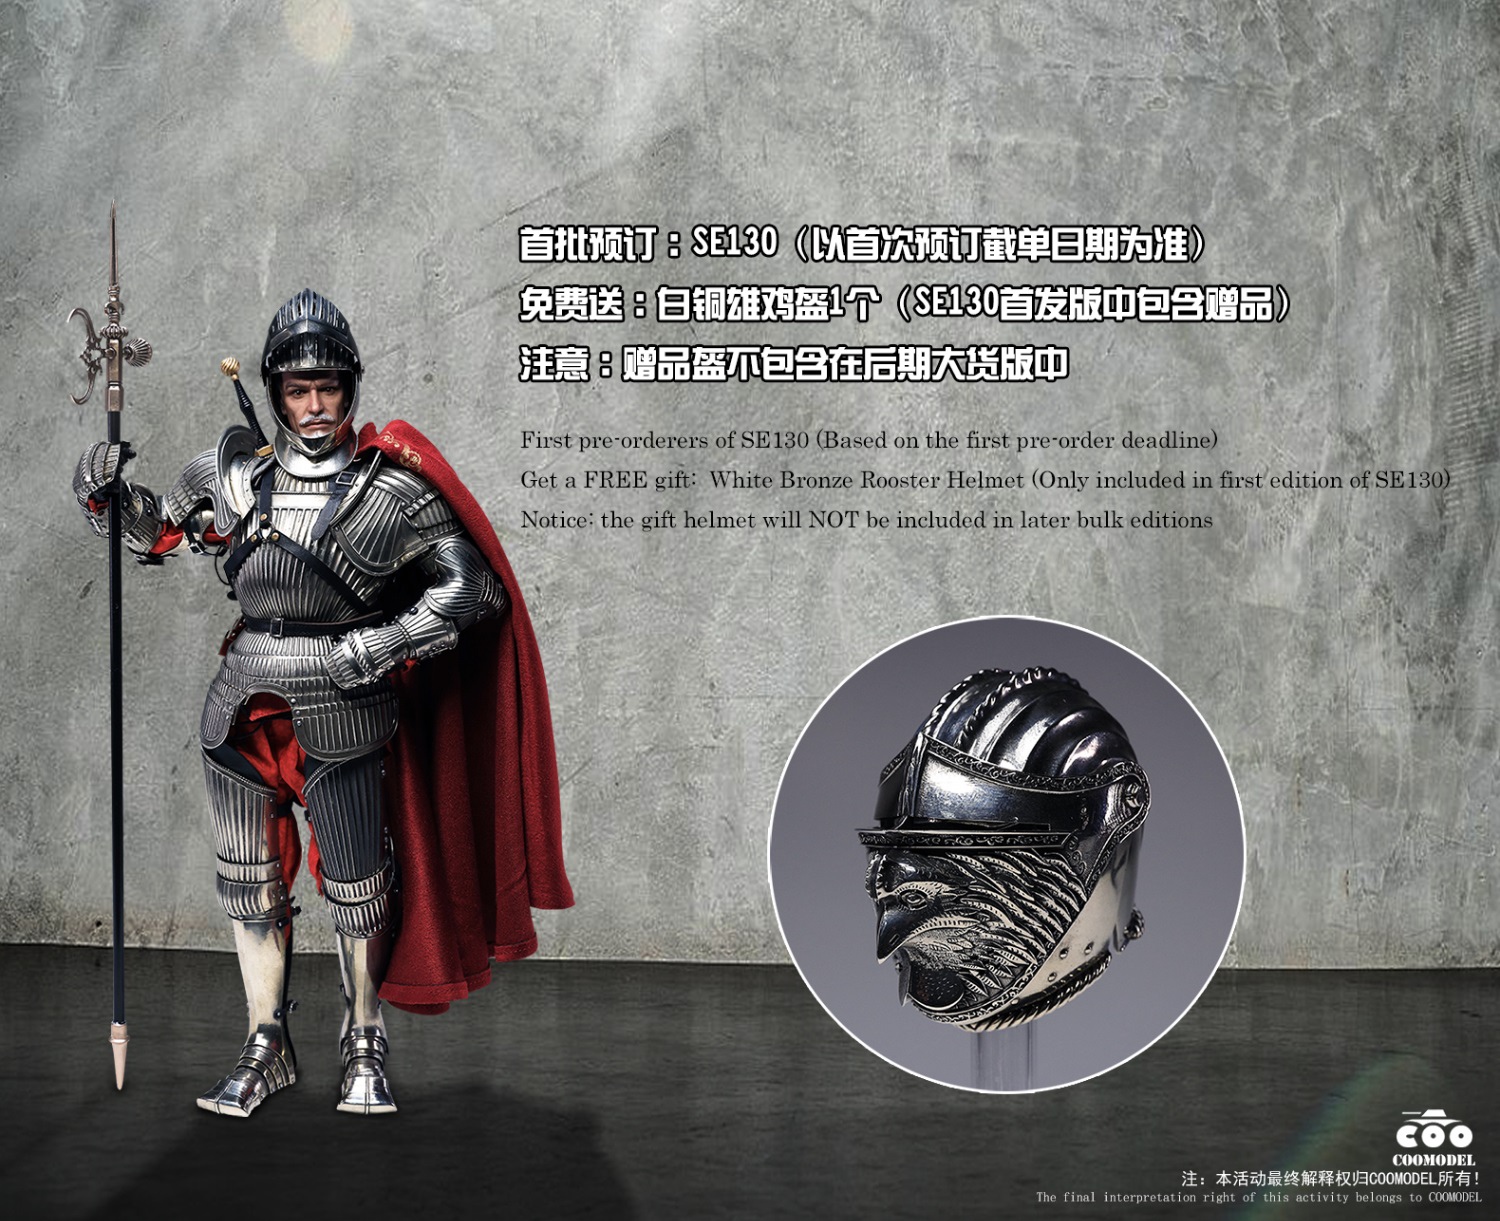 male - NEW PRODUCT: COOMODEL - Empire Series - Holy Empire Knight (White Bronze Commemorative Edition) SE130 16162